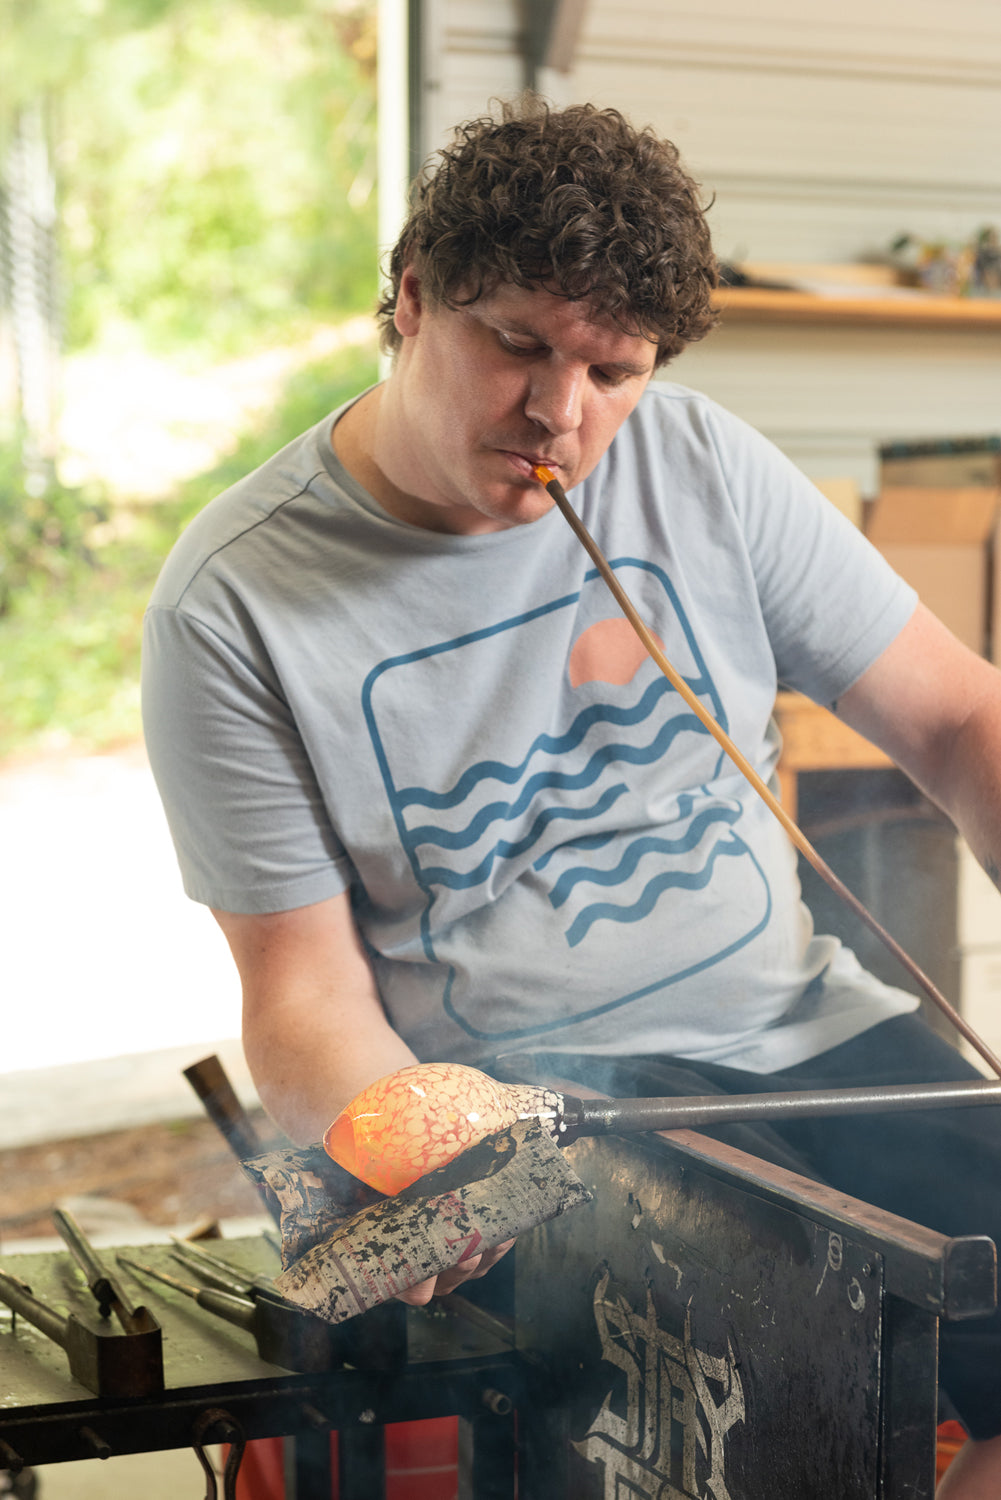 Brad smith seated at his glass blowing bench with a wet newsprint shaping a globe of hot glass.